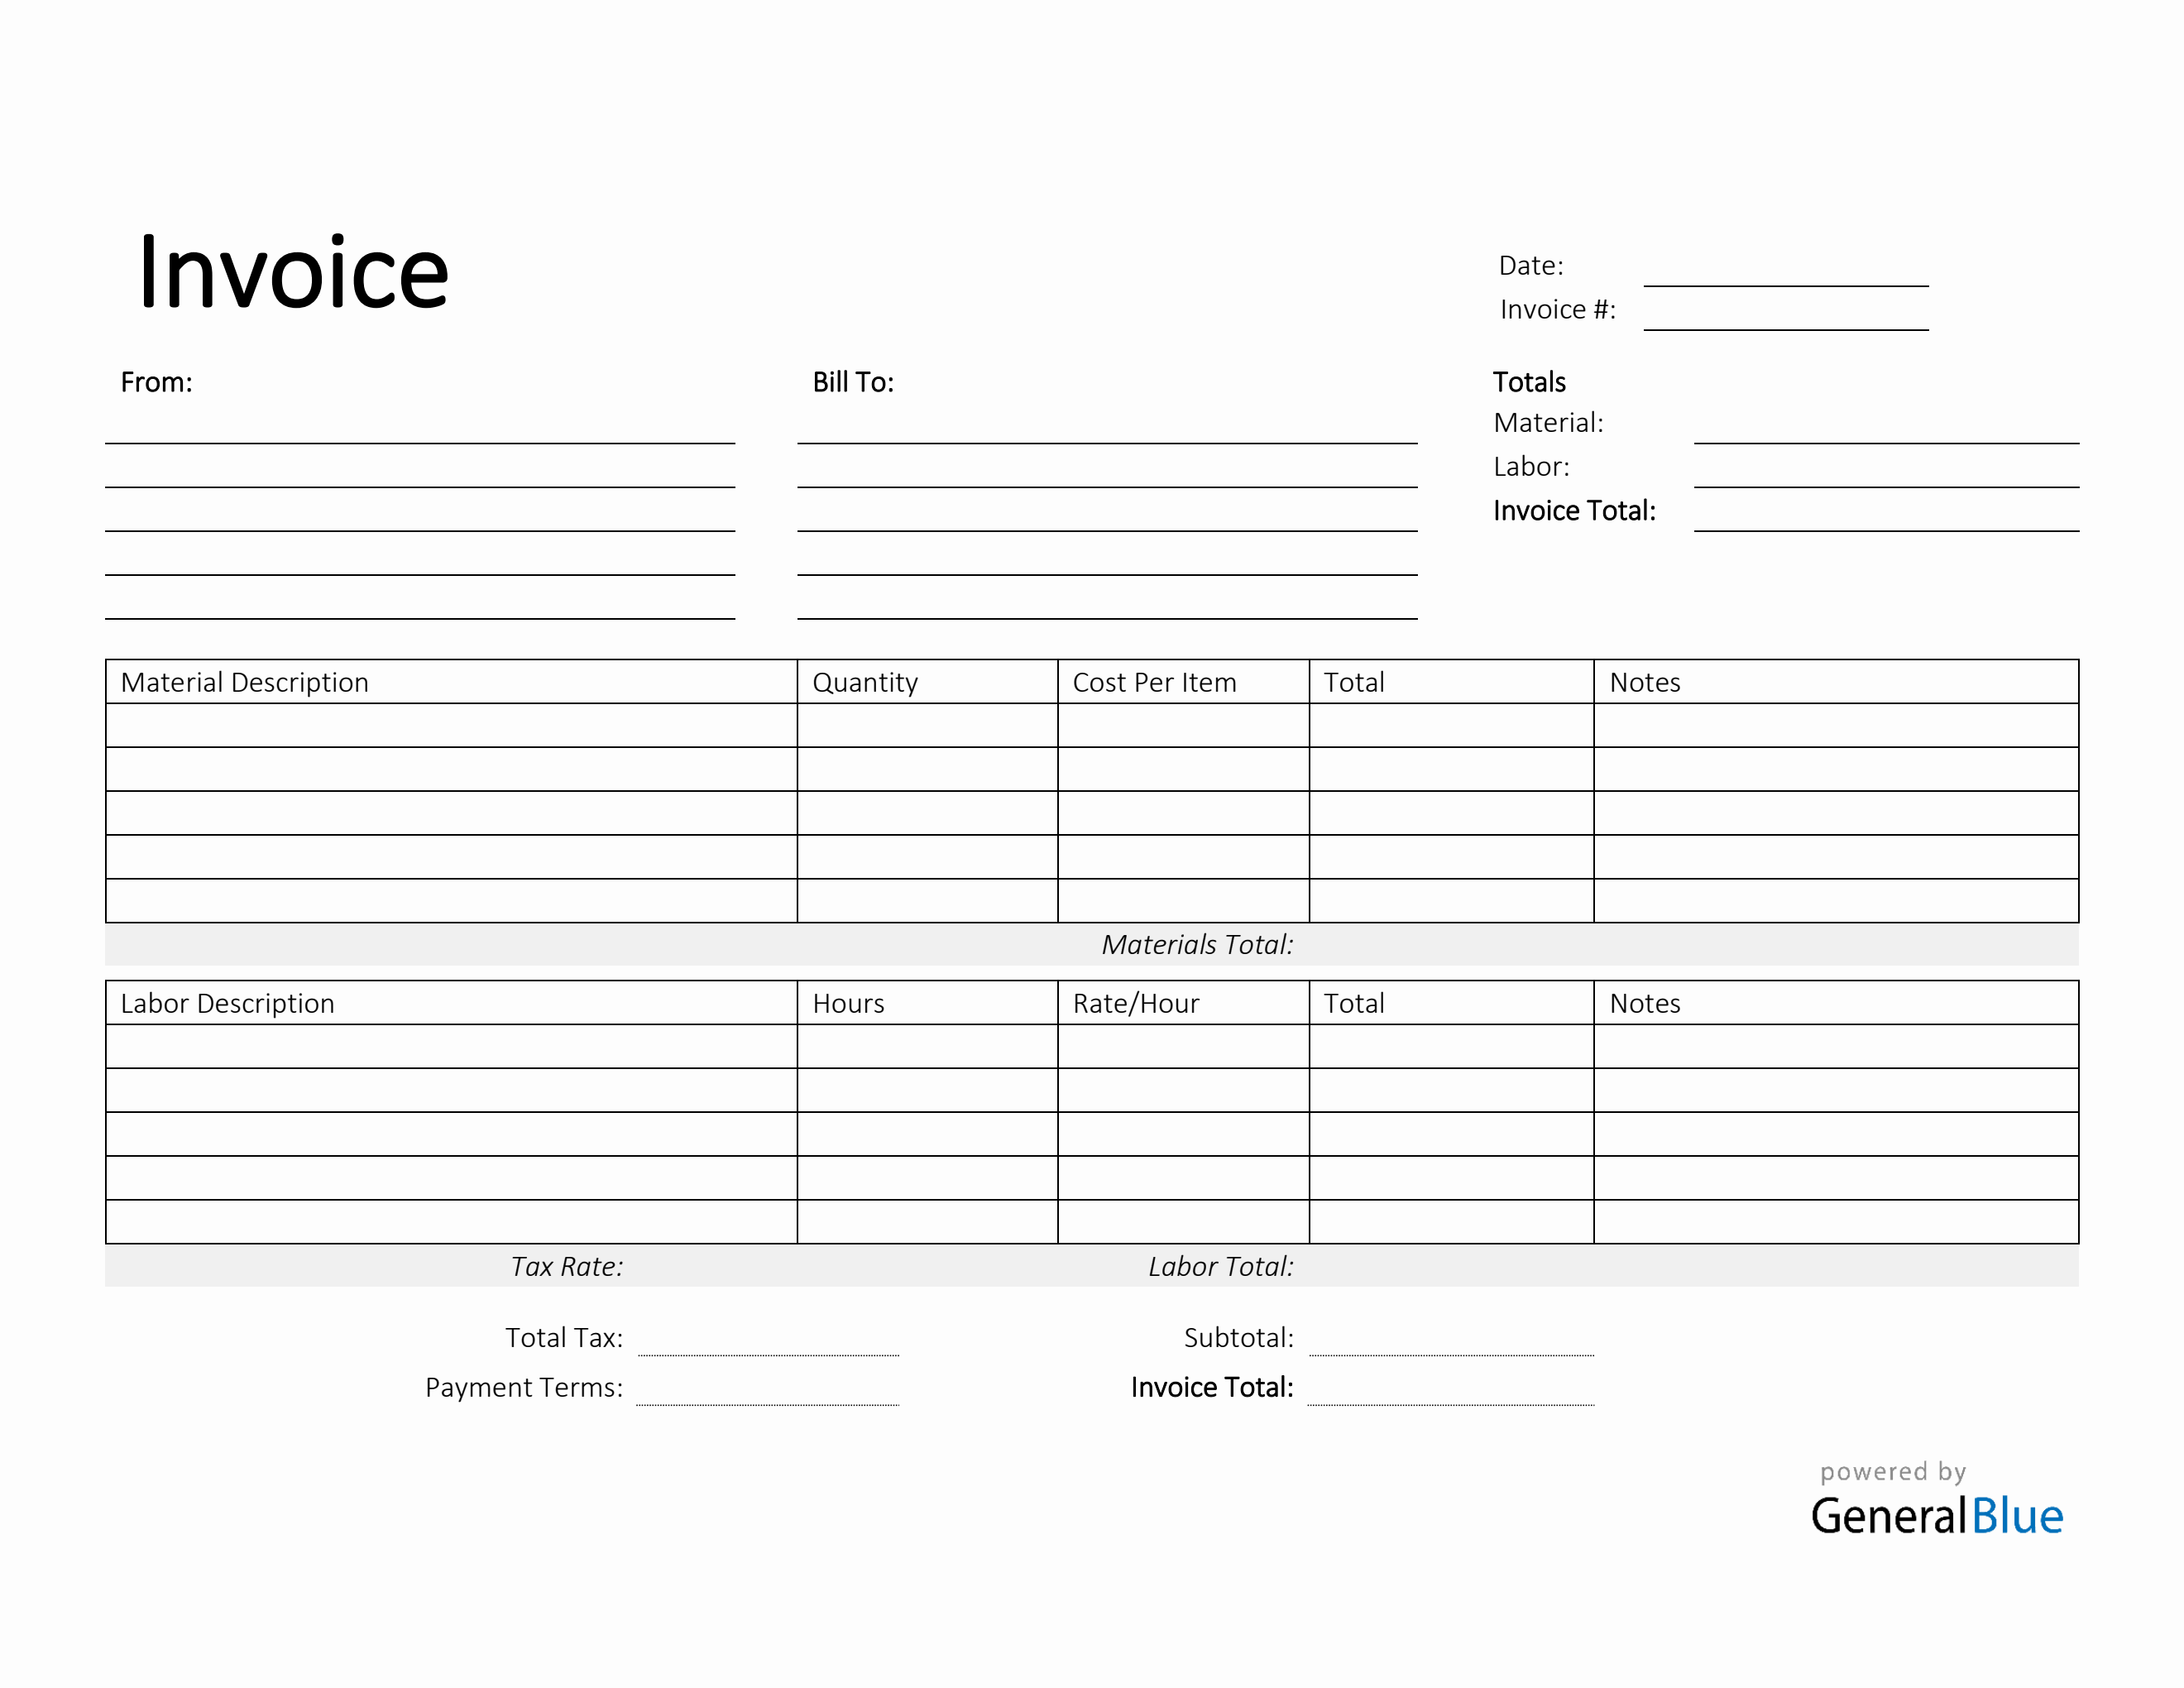 time-and-material-invoice-template